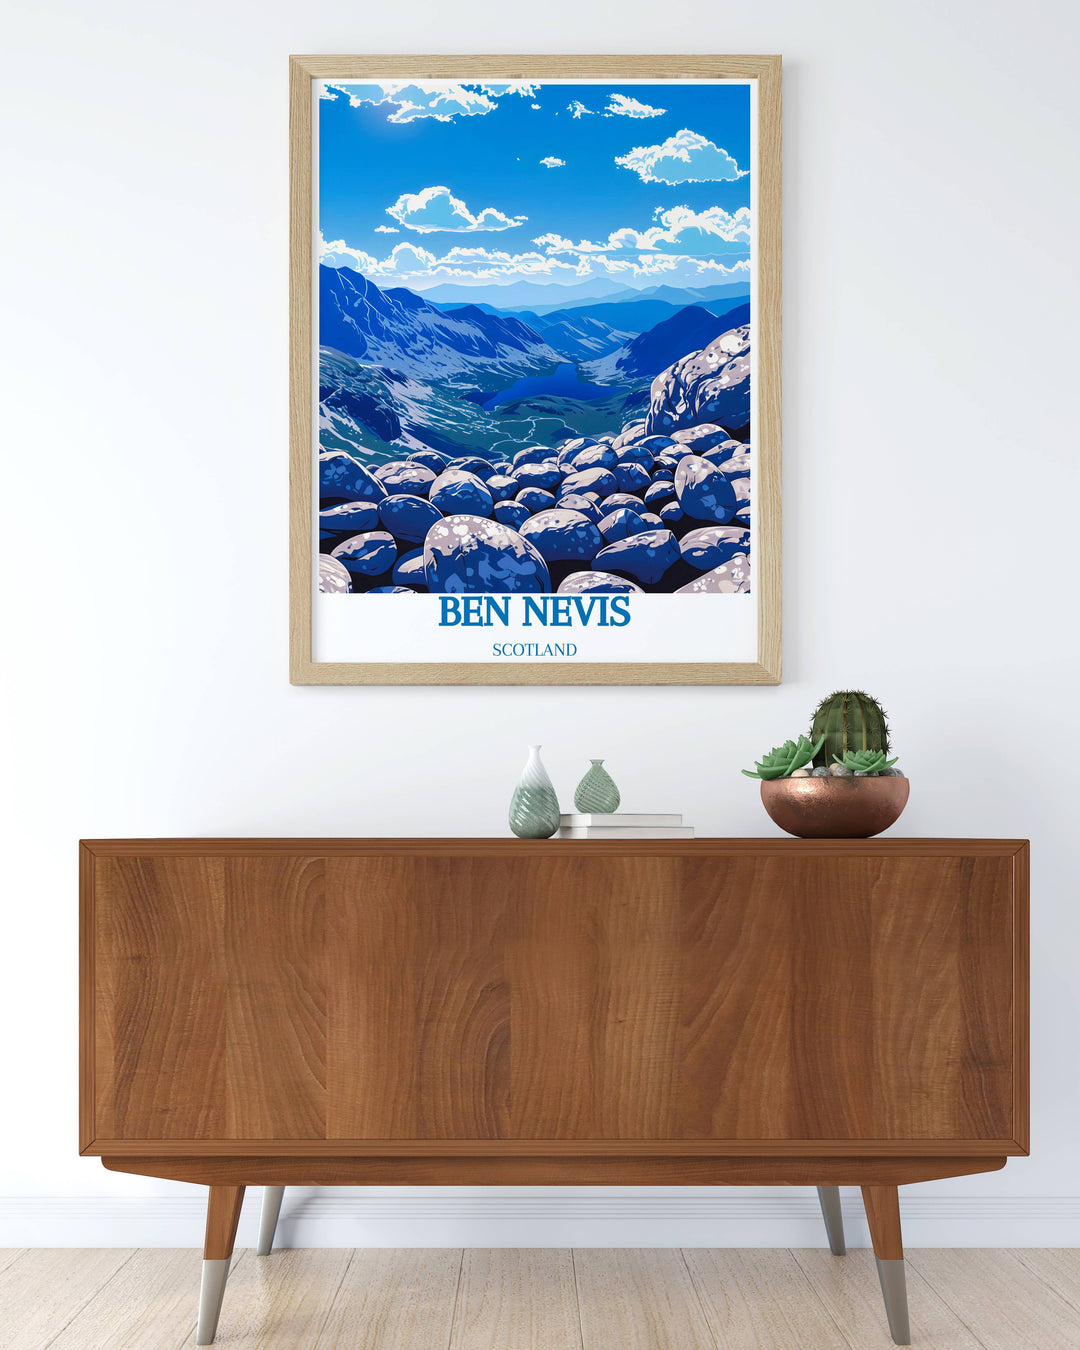 Twilight at Ben Nevis summit travel poster, with deep blues and purples casting a mystical glow over the mountain